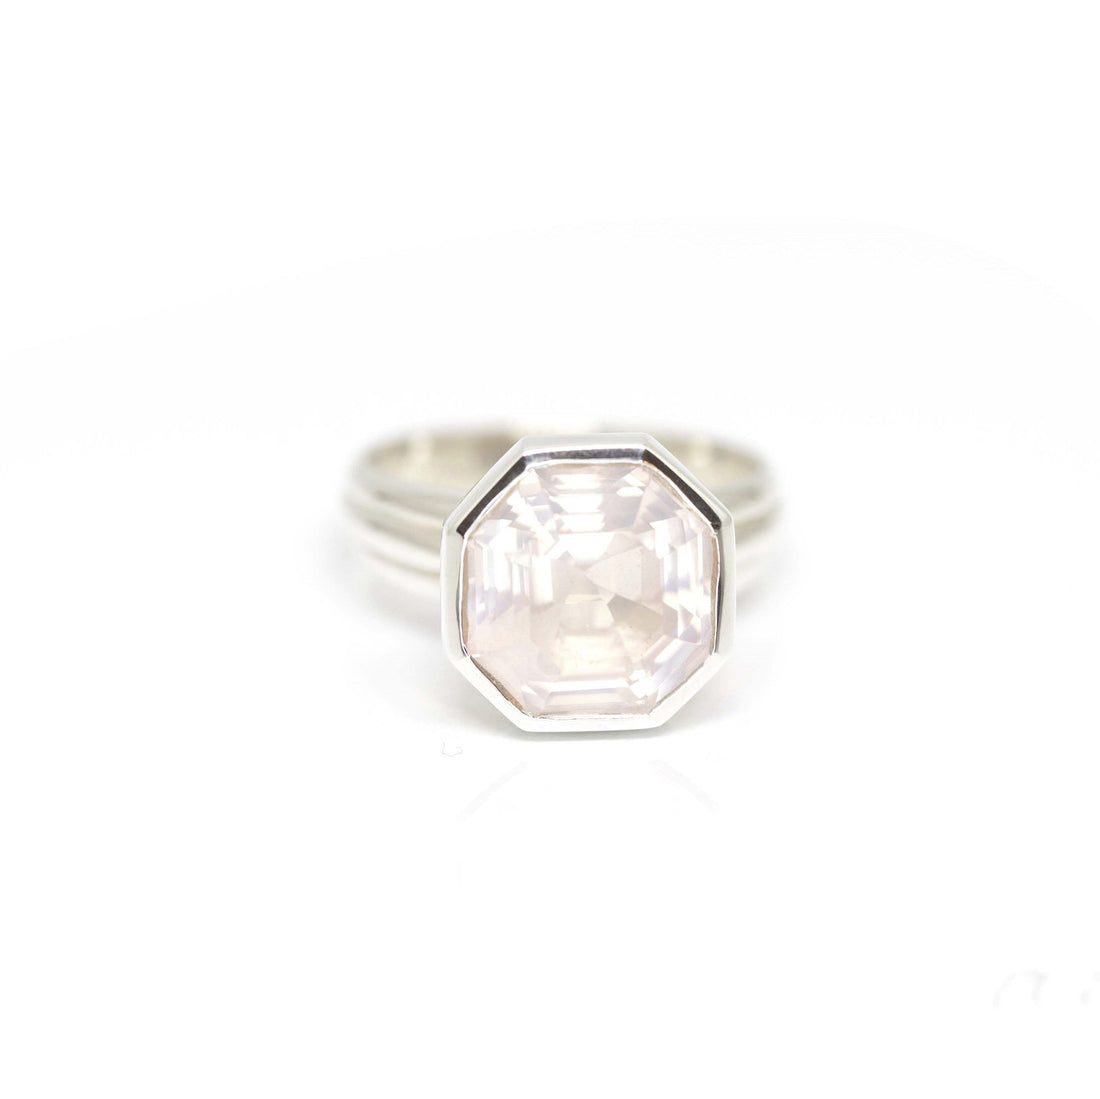 rose quartz ring octagon shape statement silver ring designer by bena jewelry in montreal